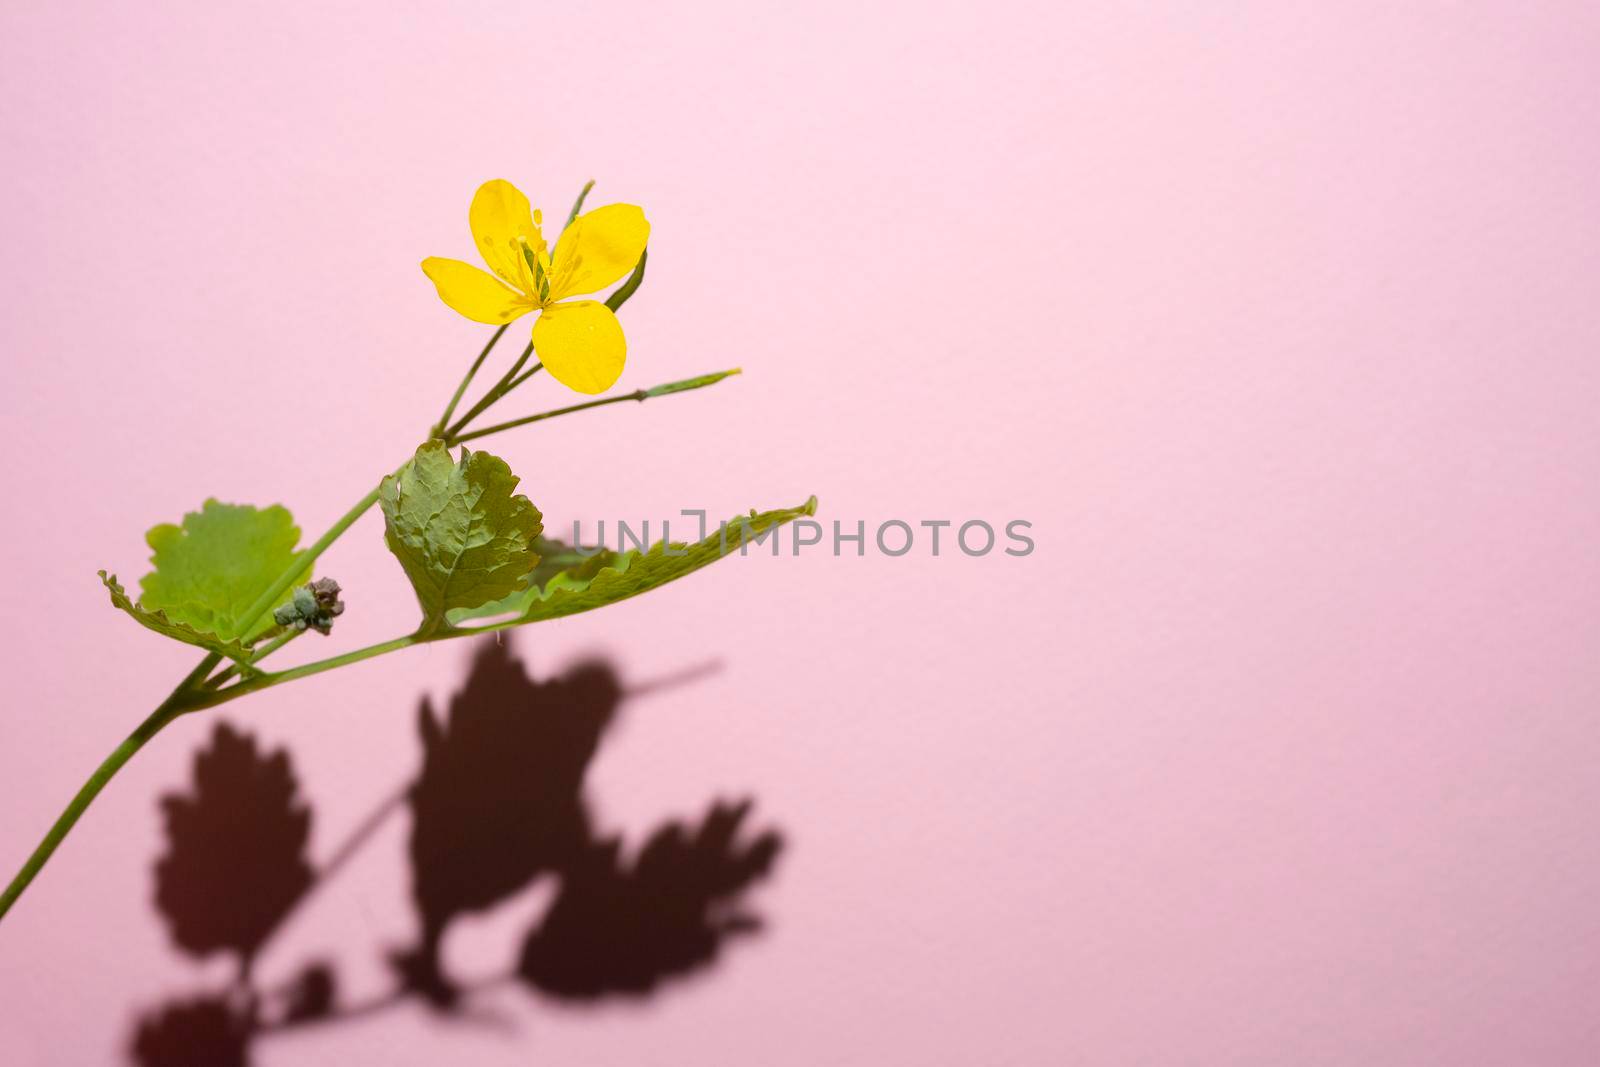 Common buttercup, Ranunculus acris, a yellow flower taken with a hard shadow against a pink background